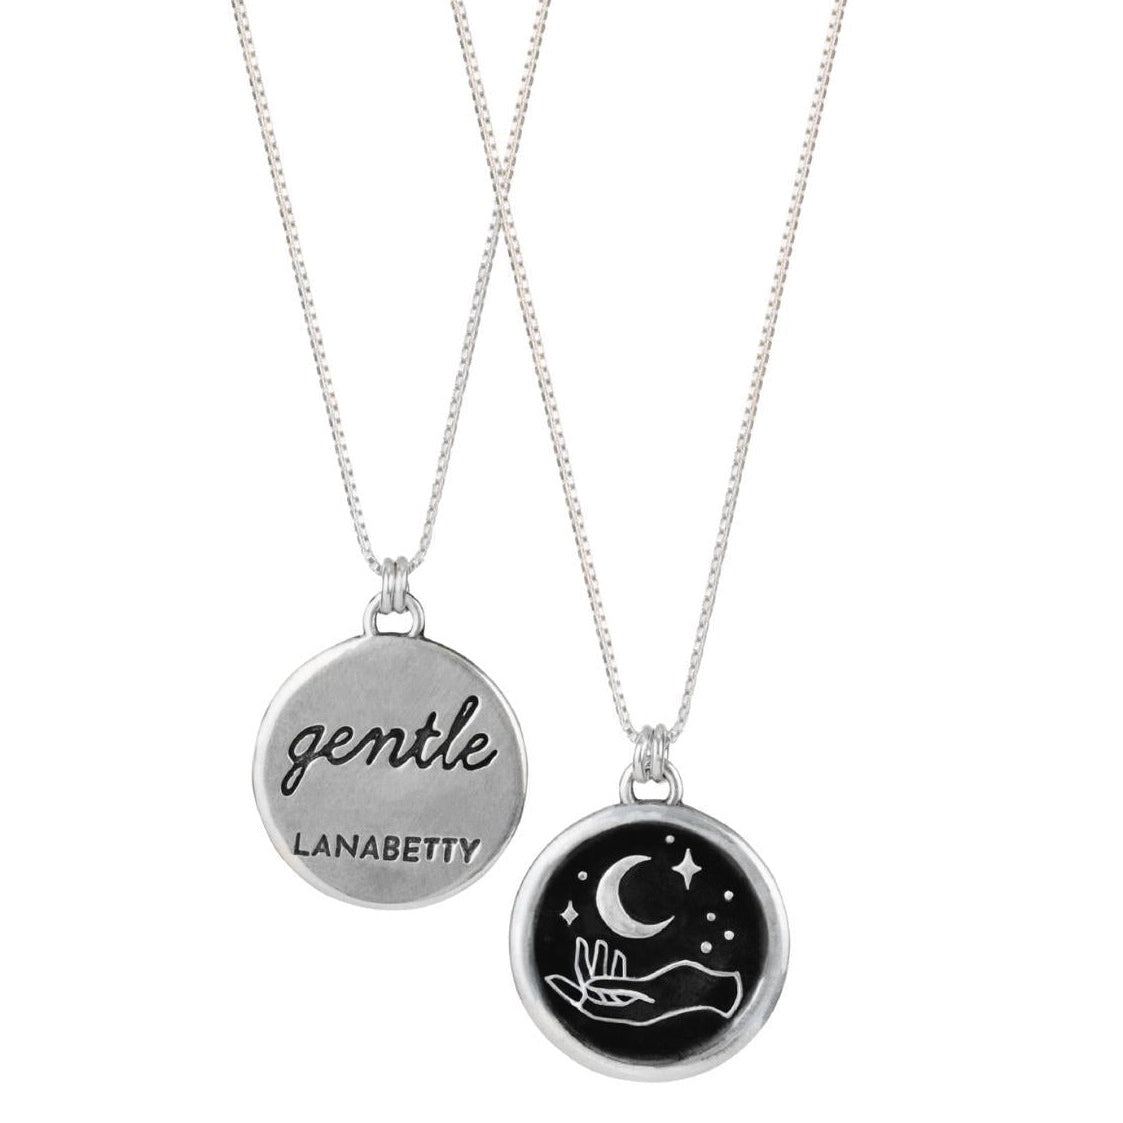 Gentle Sterling Silver Mantra Necklace with 18" chain by Lanabetty